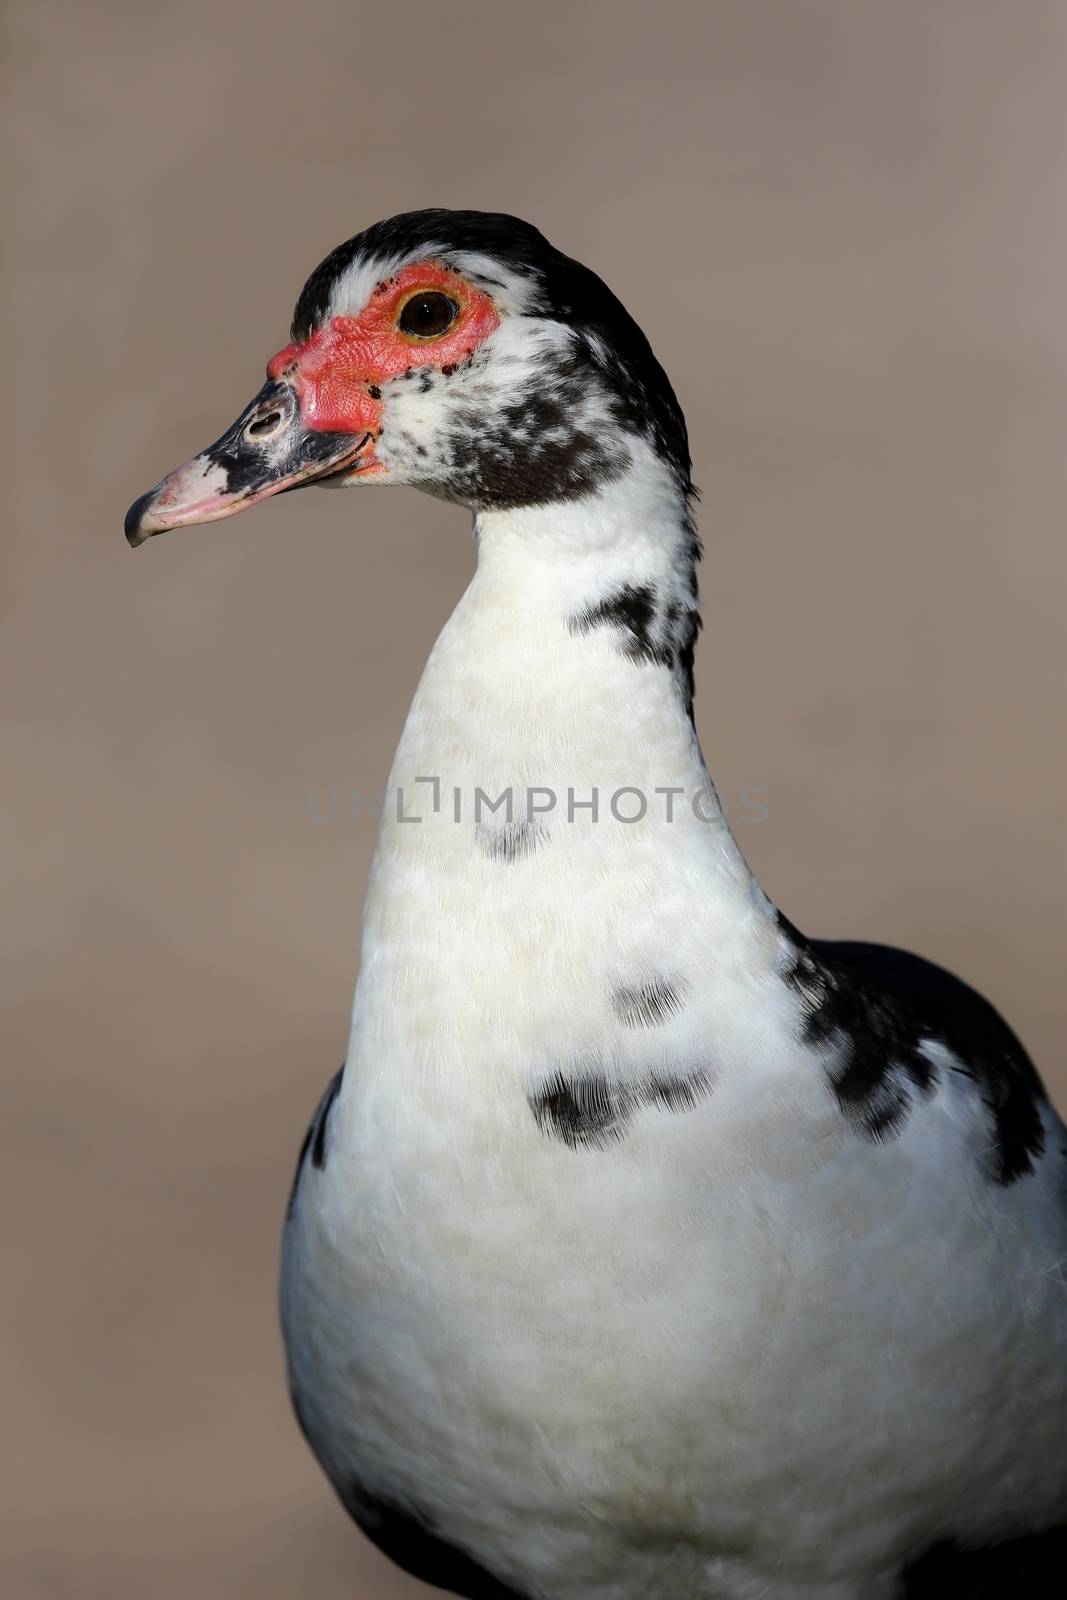 Black and White Muscovy duck with red face